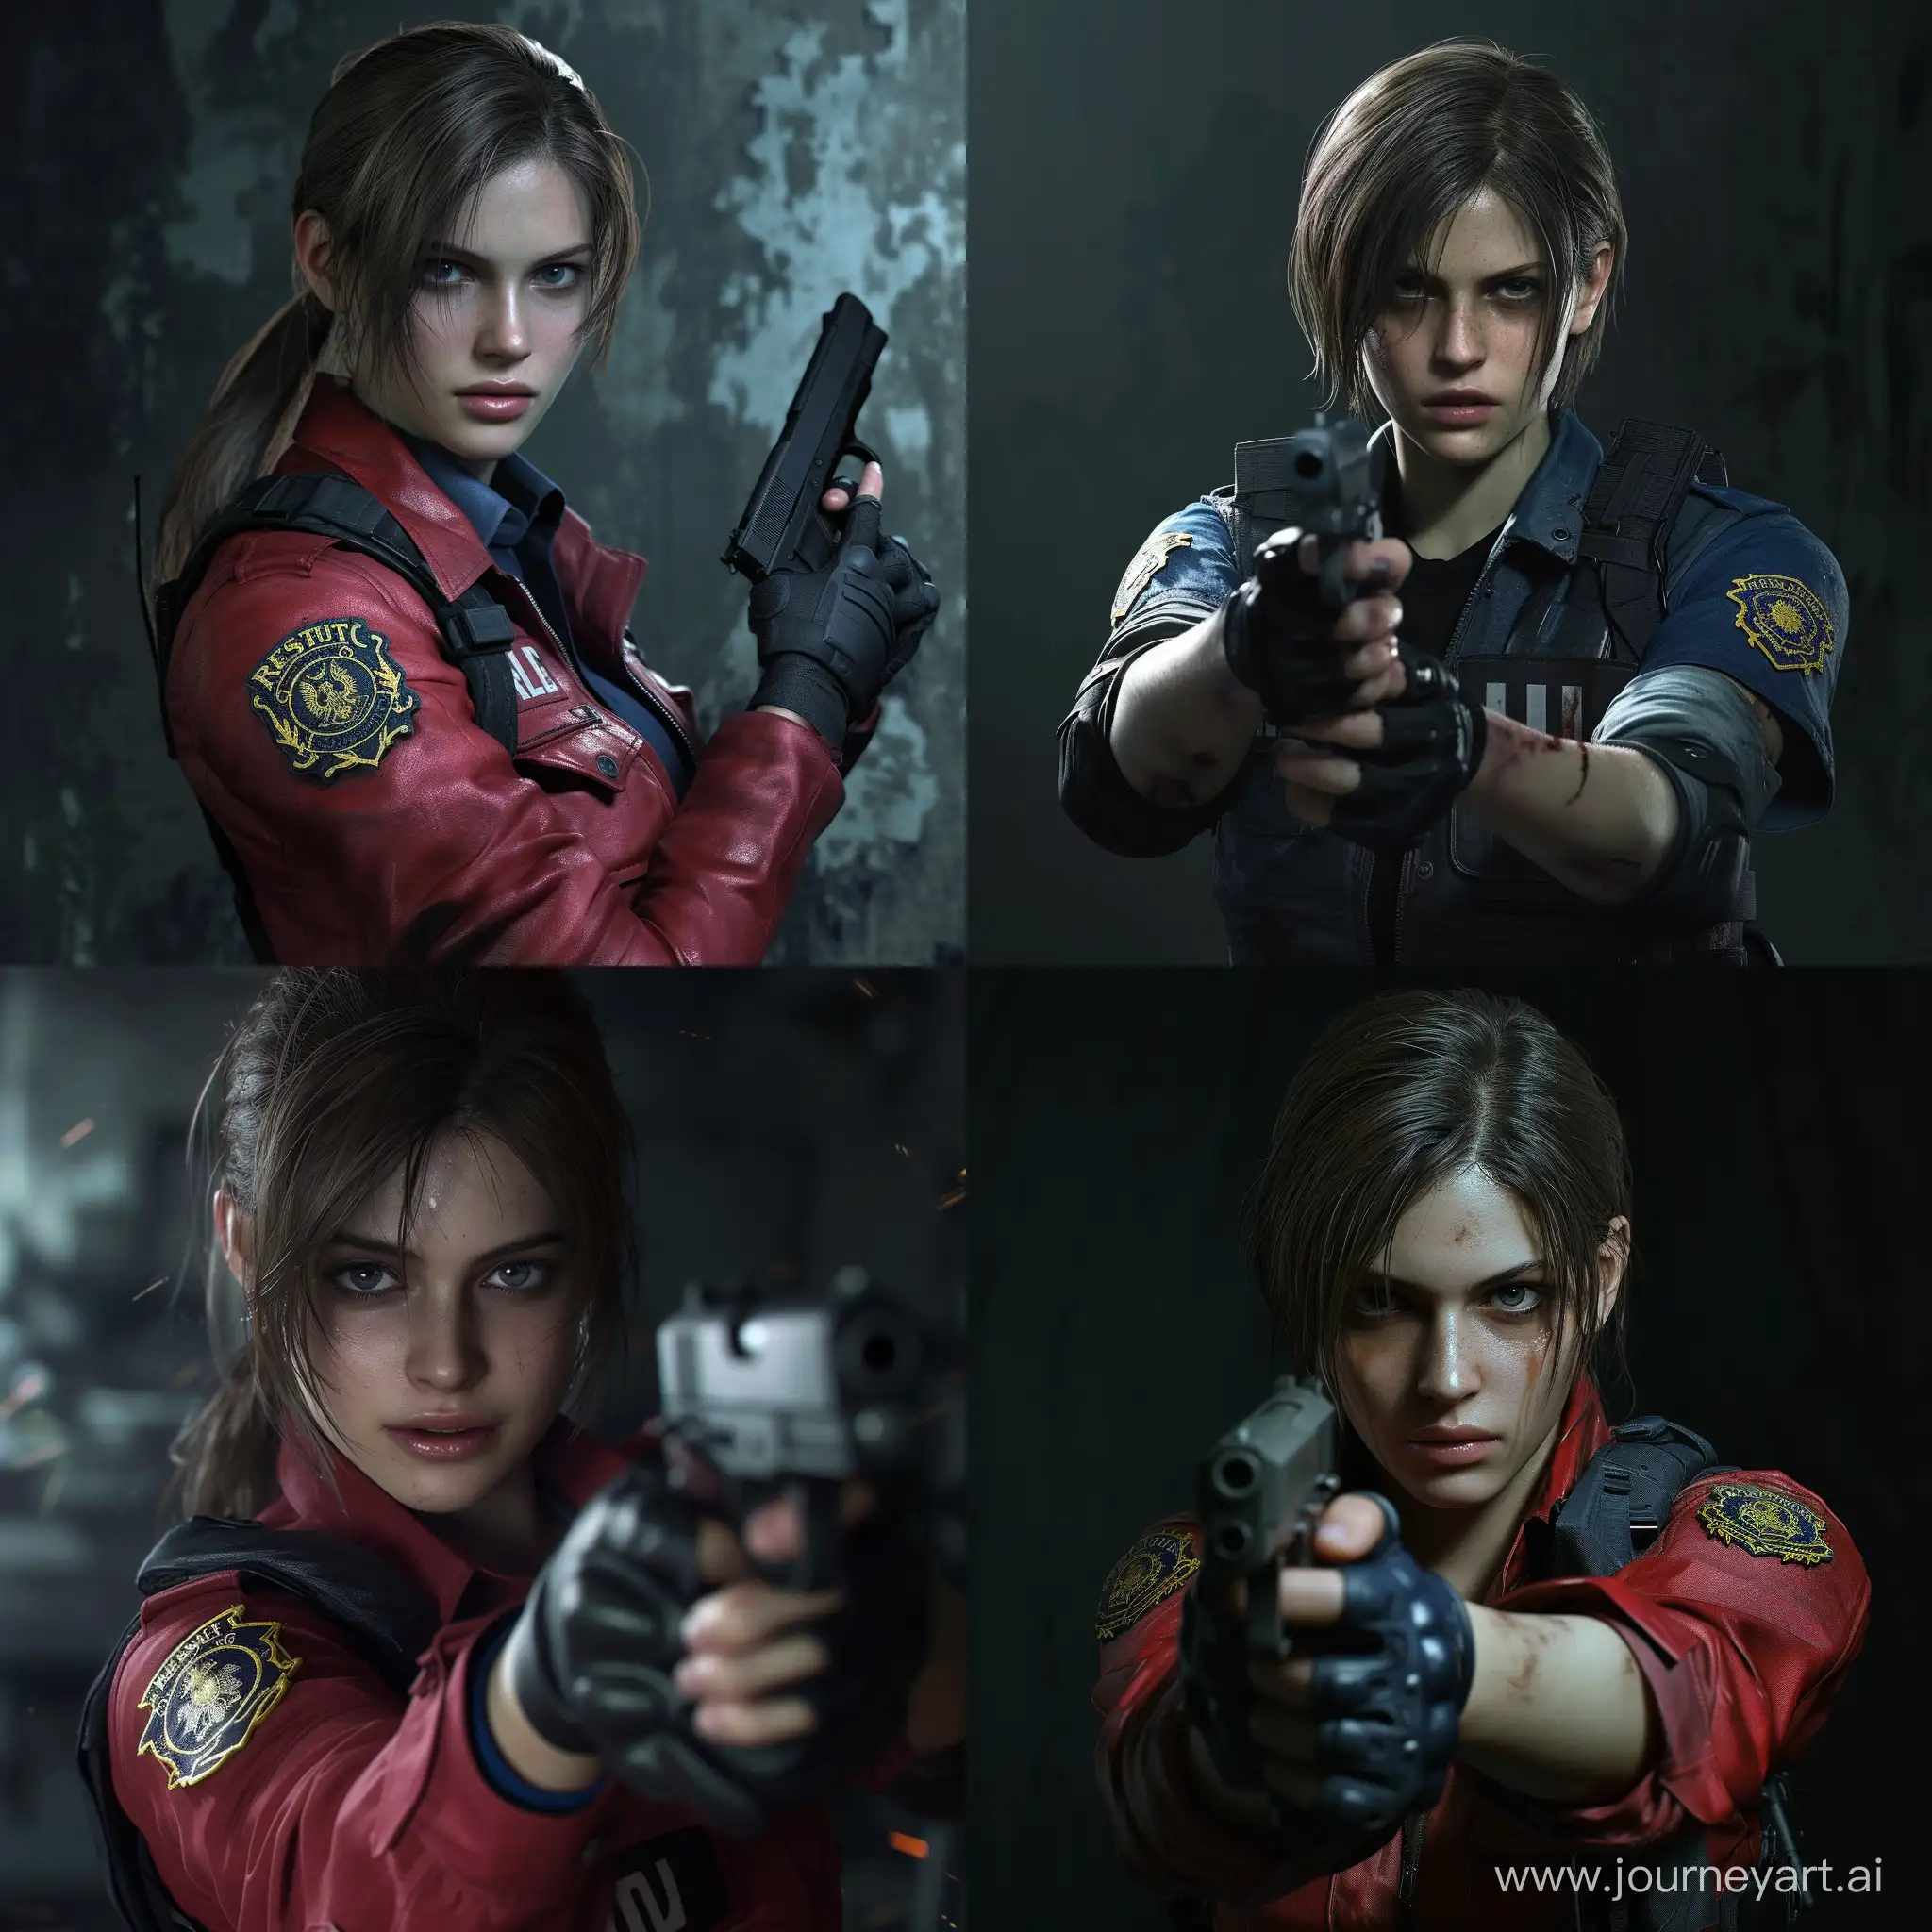 The main character of Resident Evil 2